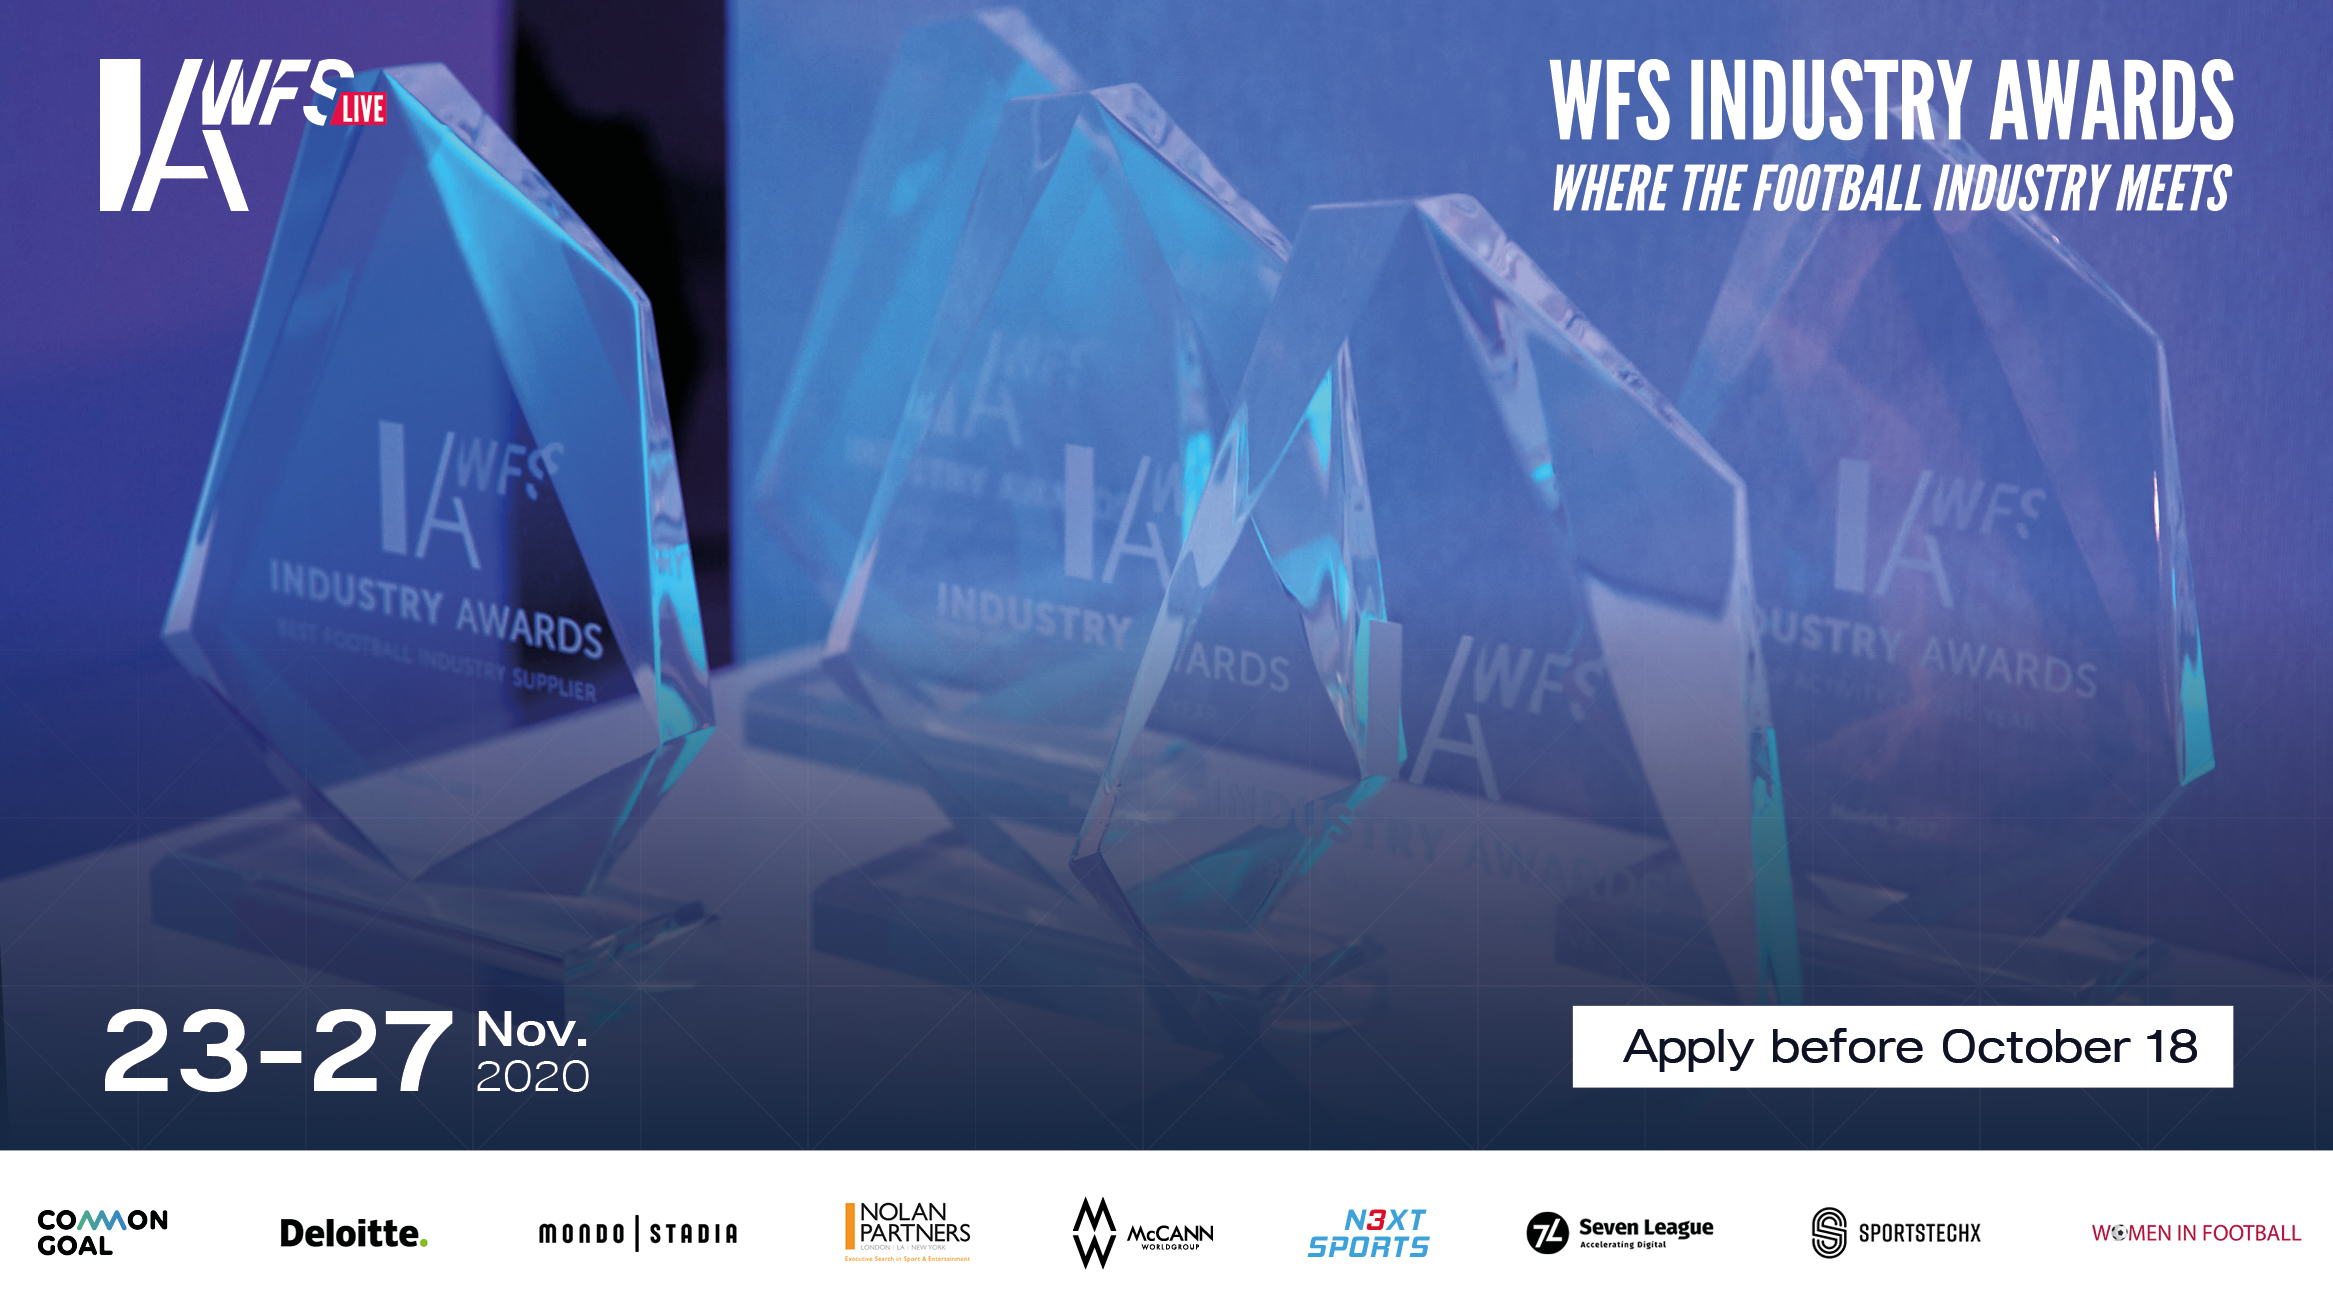 The 2020 WFS industry Awards are now open to applications.